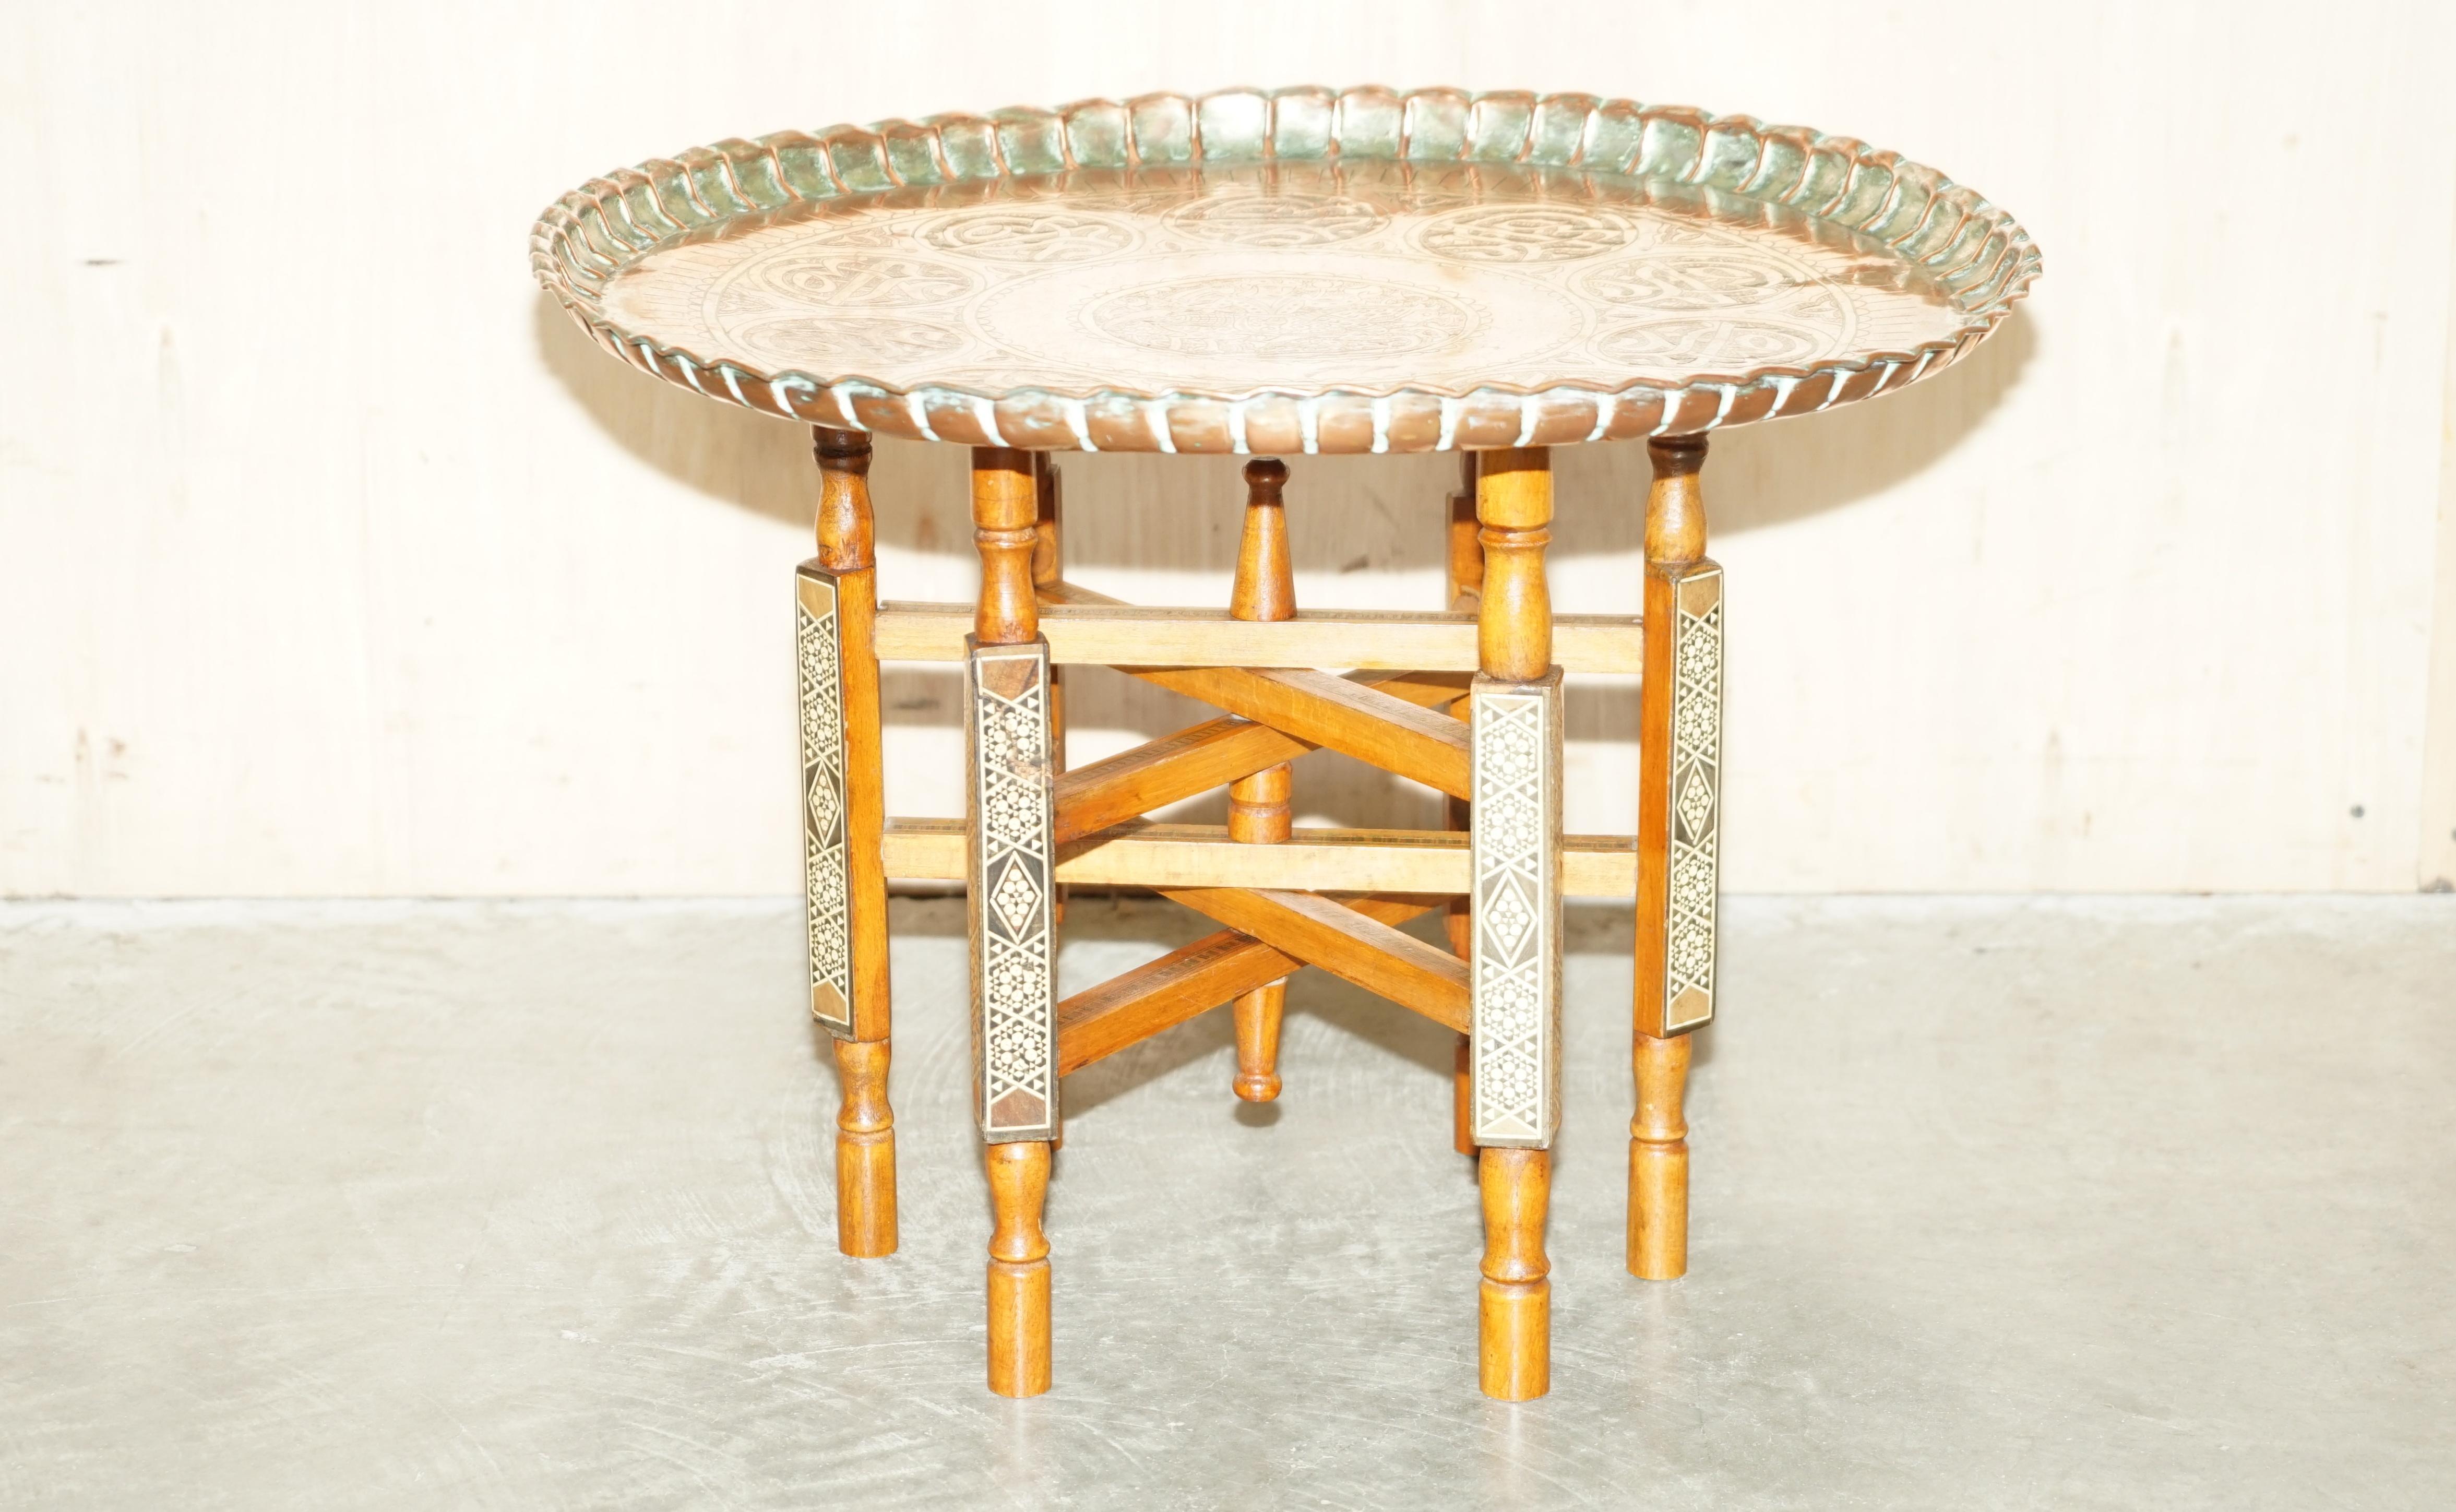 We are delighted to offer for sale this circa very rare 1920 Antique Persian Moroccan engraved brass top folding table.

A very good looking and well-made table, the top is beautifully engraved by hand, the legs are ornately inlaid with very